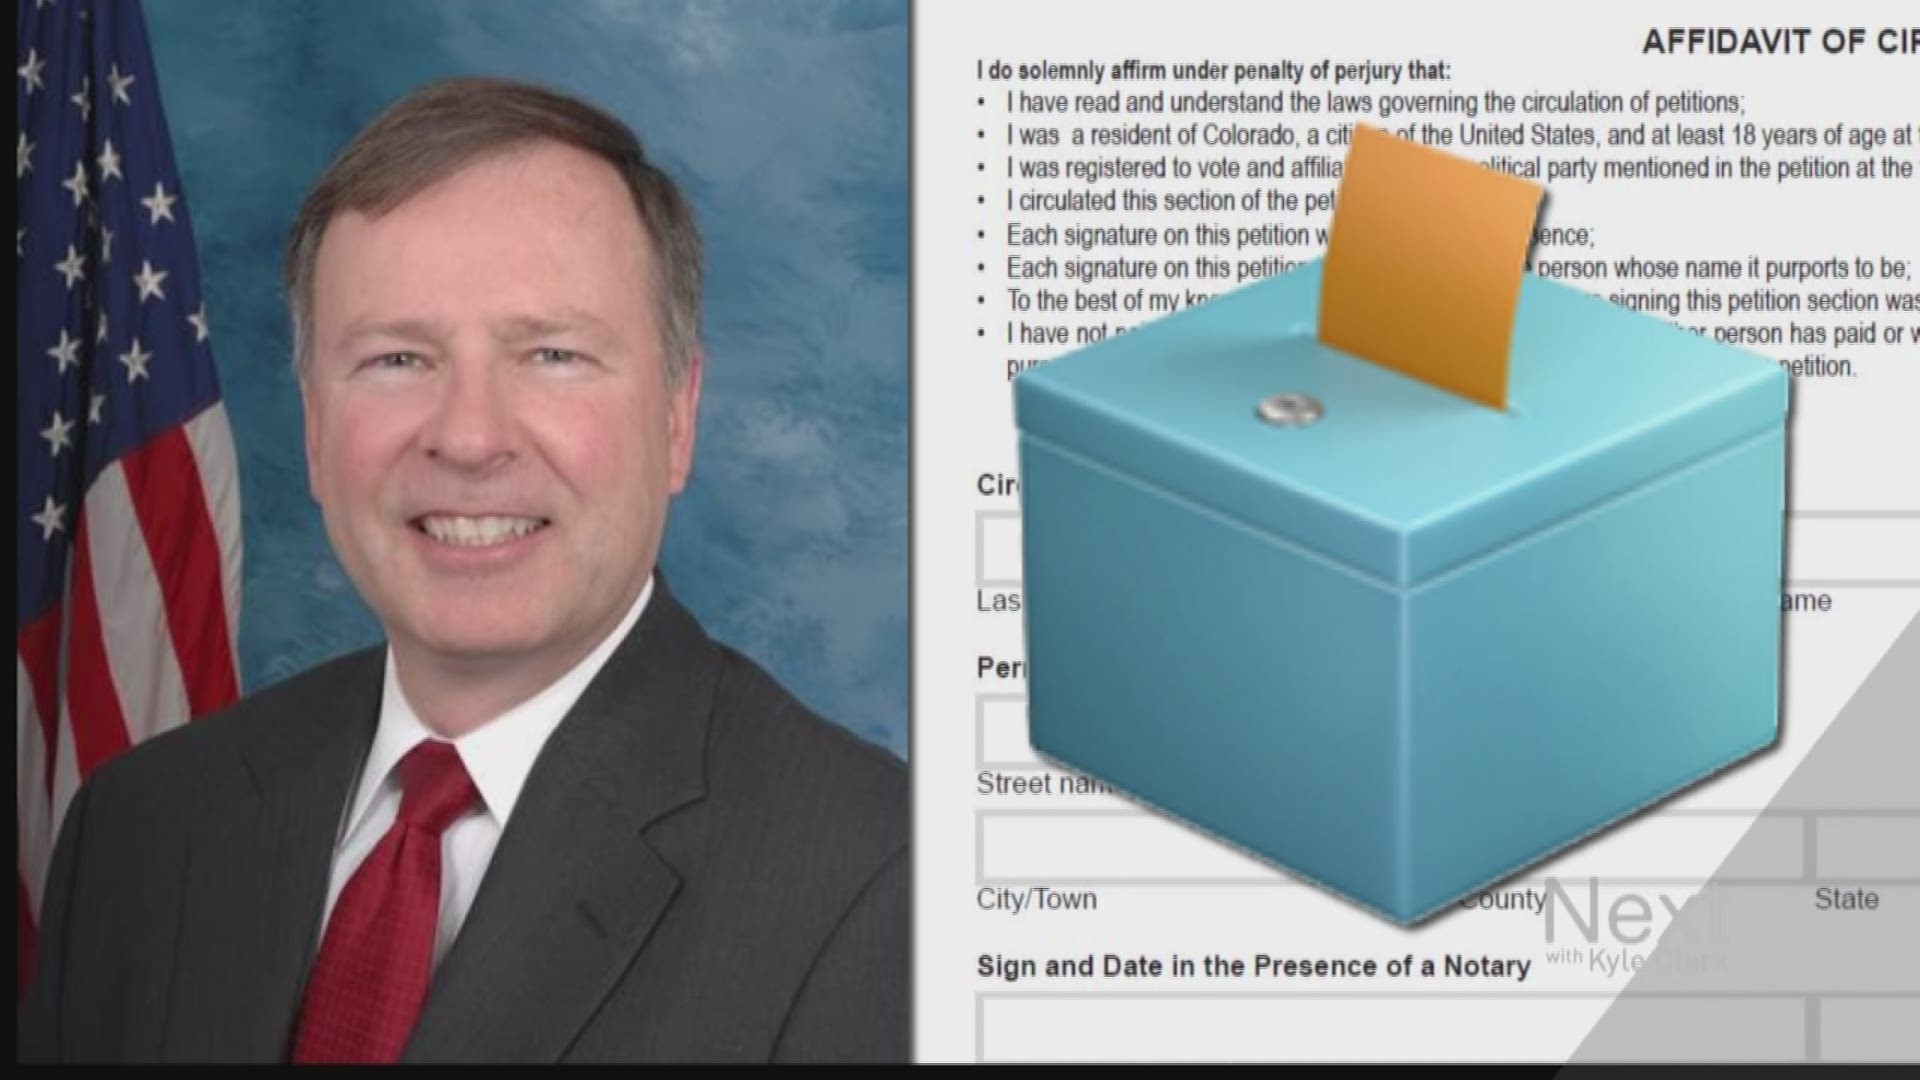 Voters in Colorado Springs are suing to keep six-term Republican Congressman Doug Lamborn off the primary ballot.